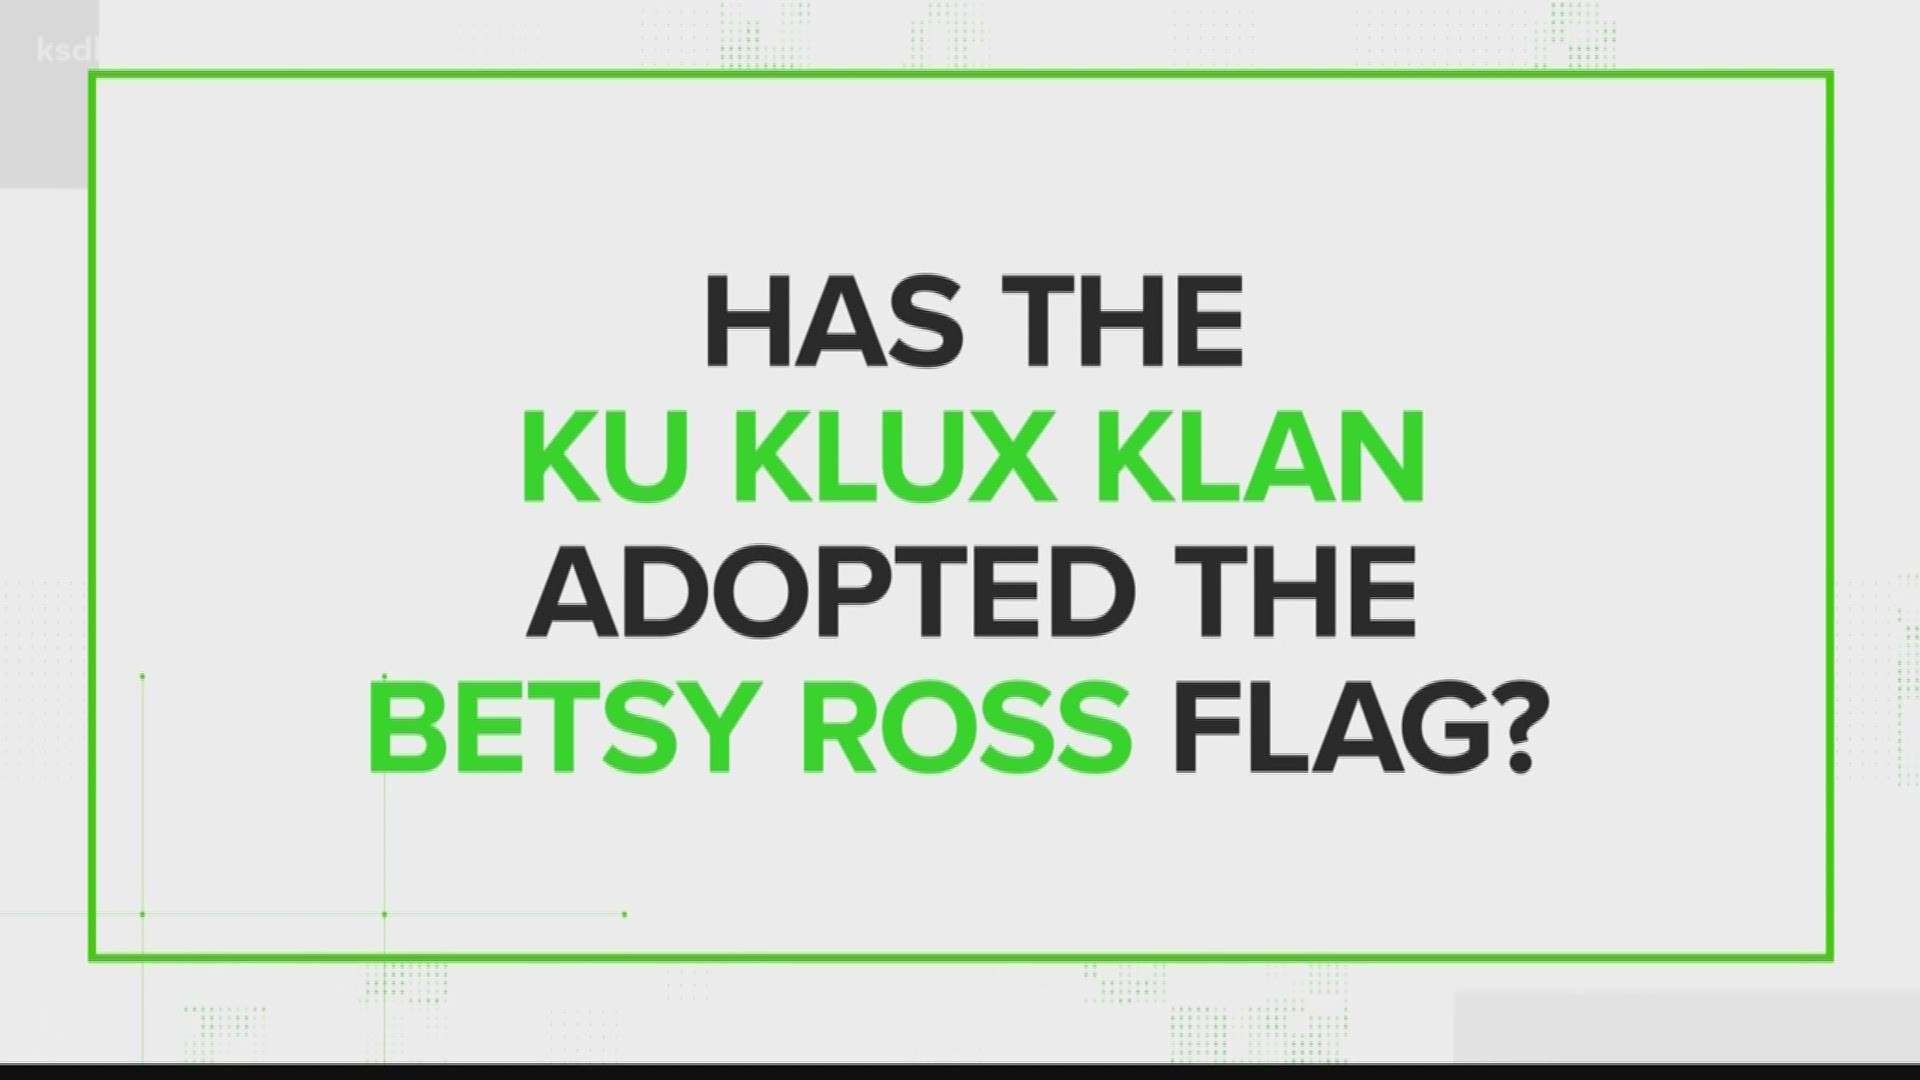 There are reports that hate groups have adopted the so-called 'Betsy Ross' flag. Our Jenna Barnes is verifying those claims.